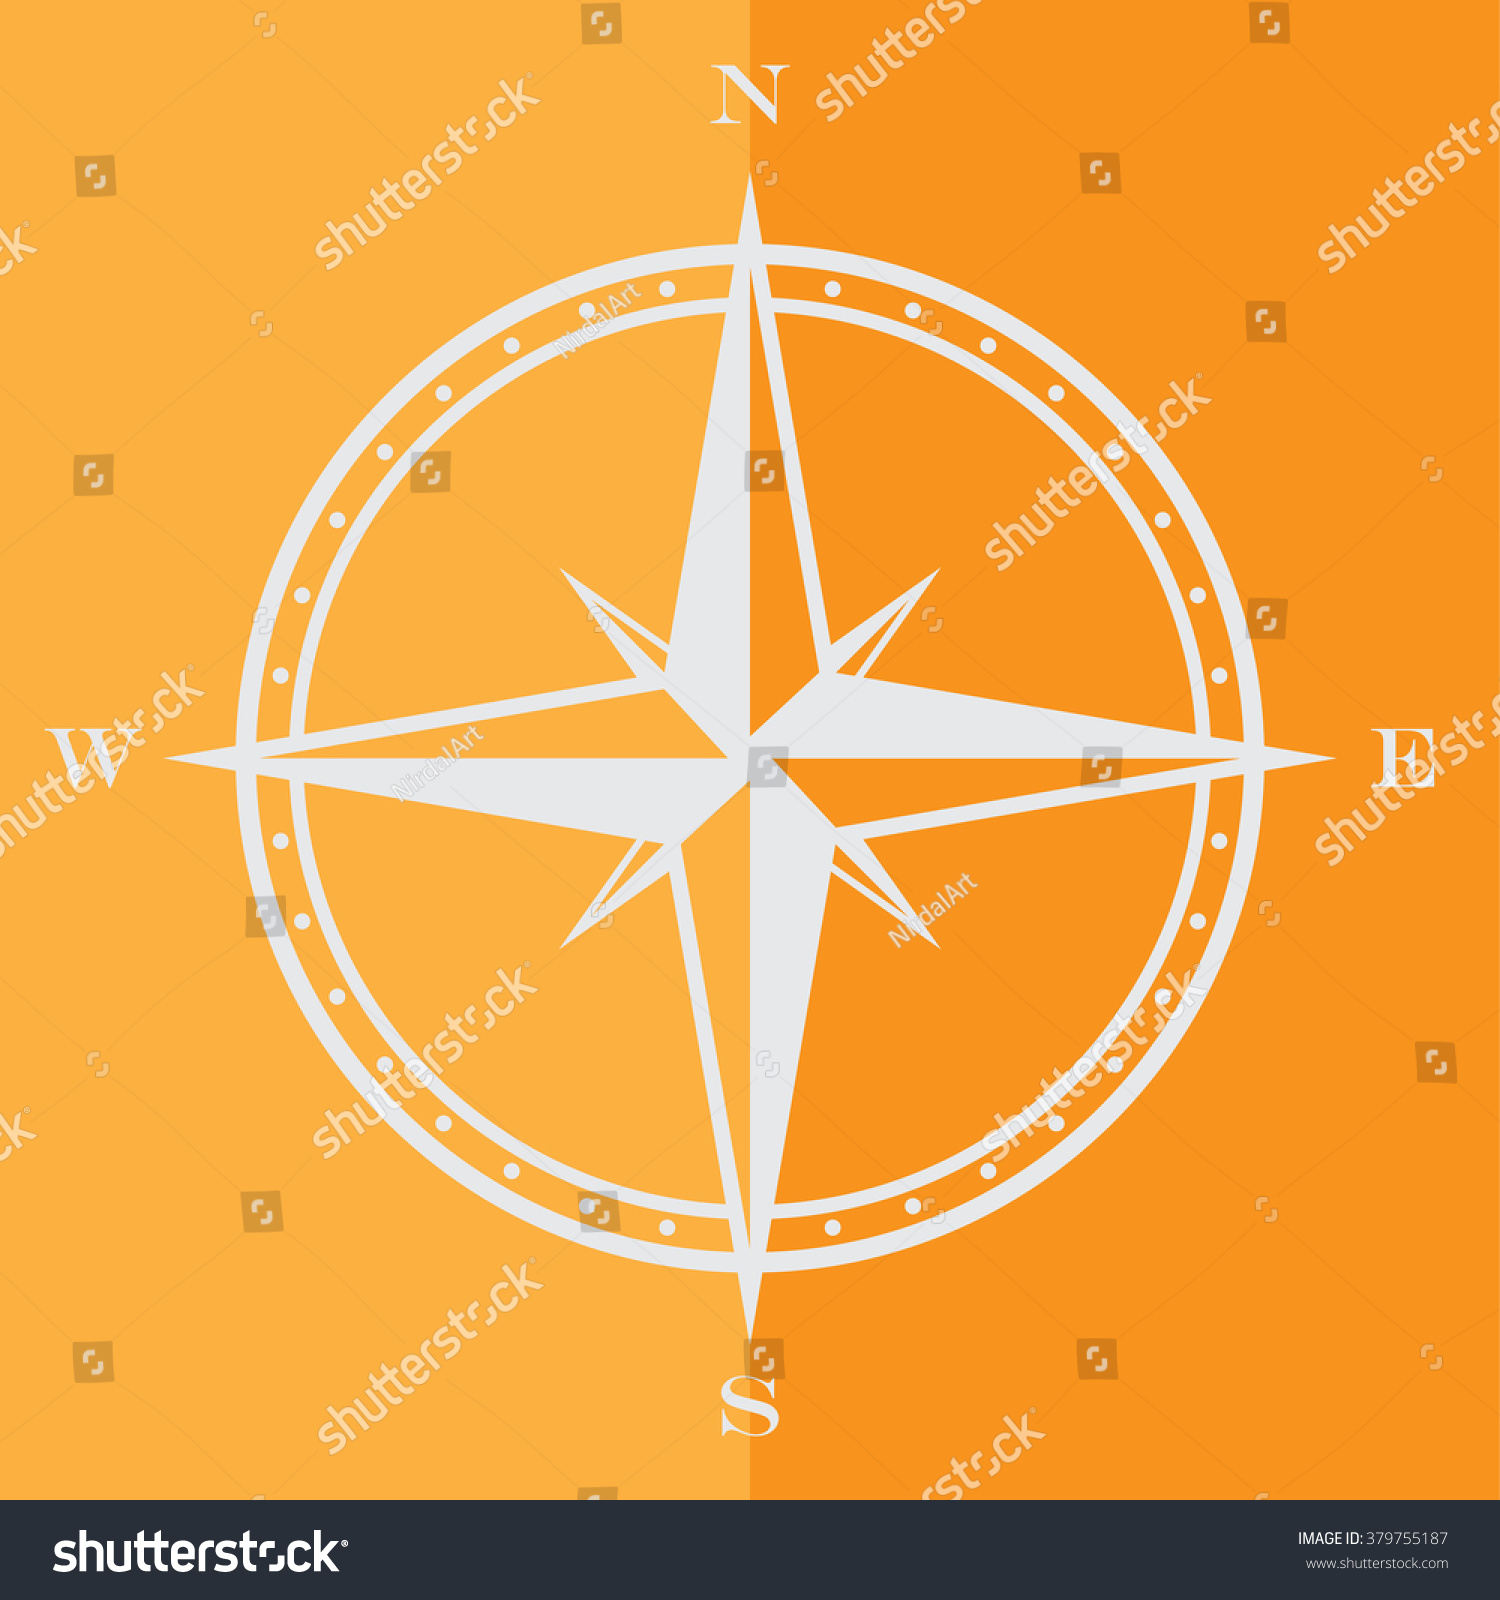 Compass Rose Symbol Stock Vector Royalty Free 379755187 Shutterstock 8732